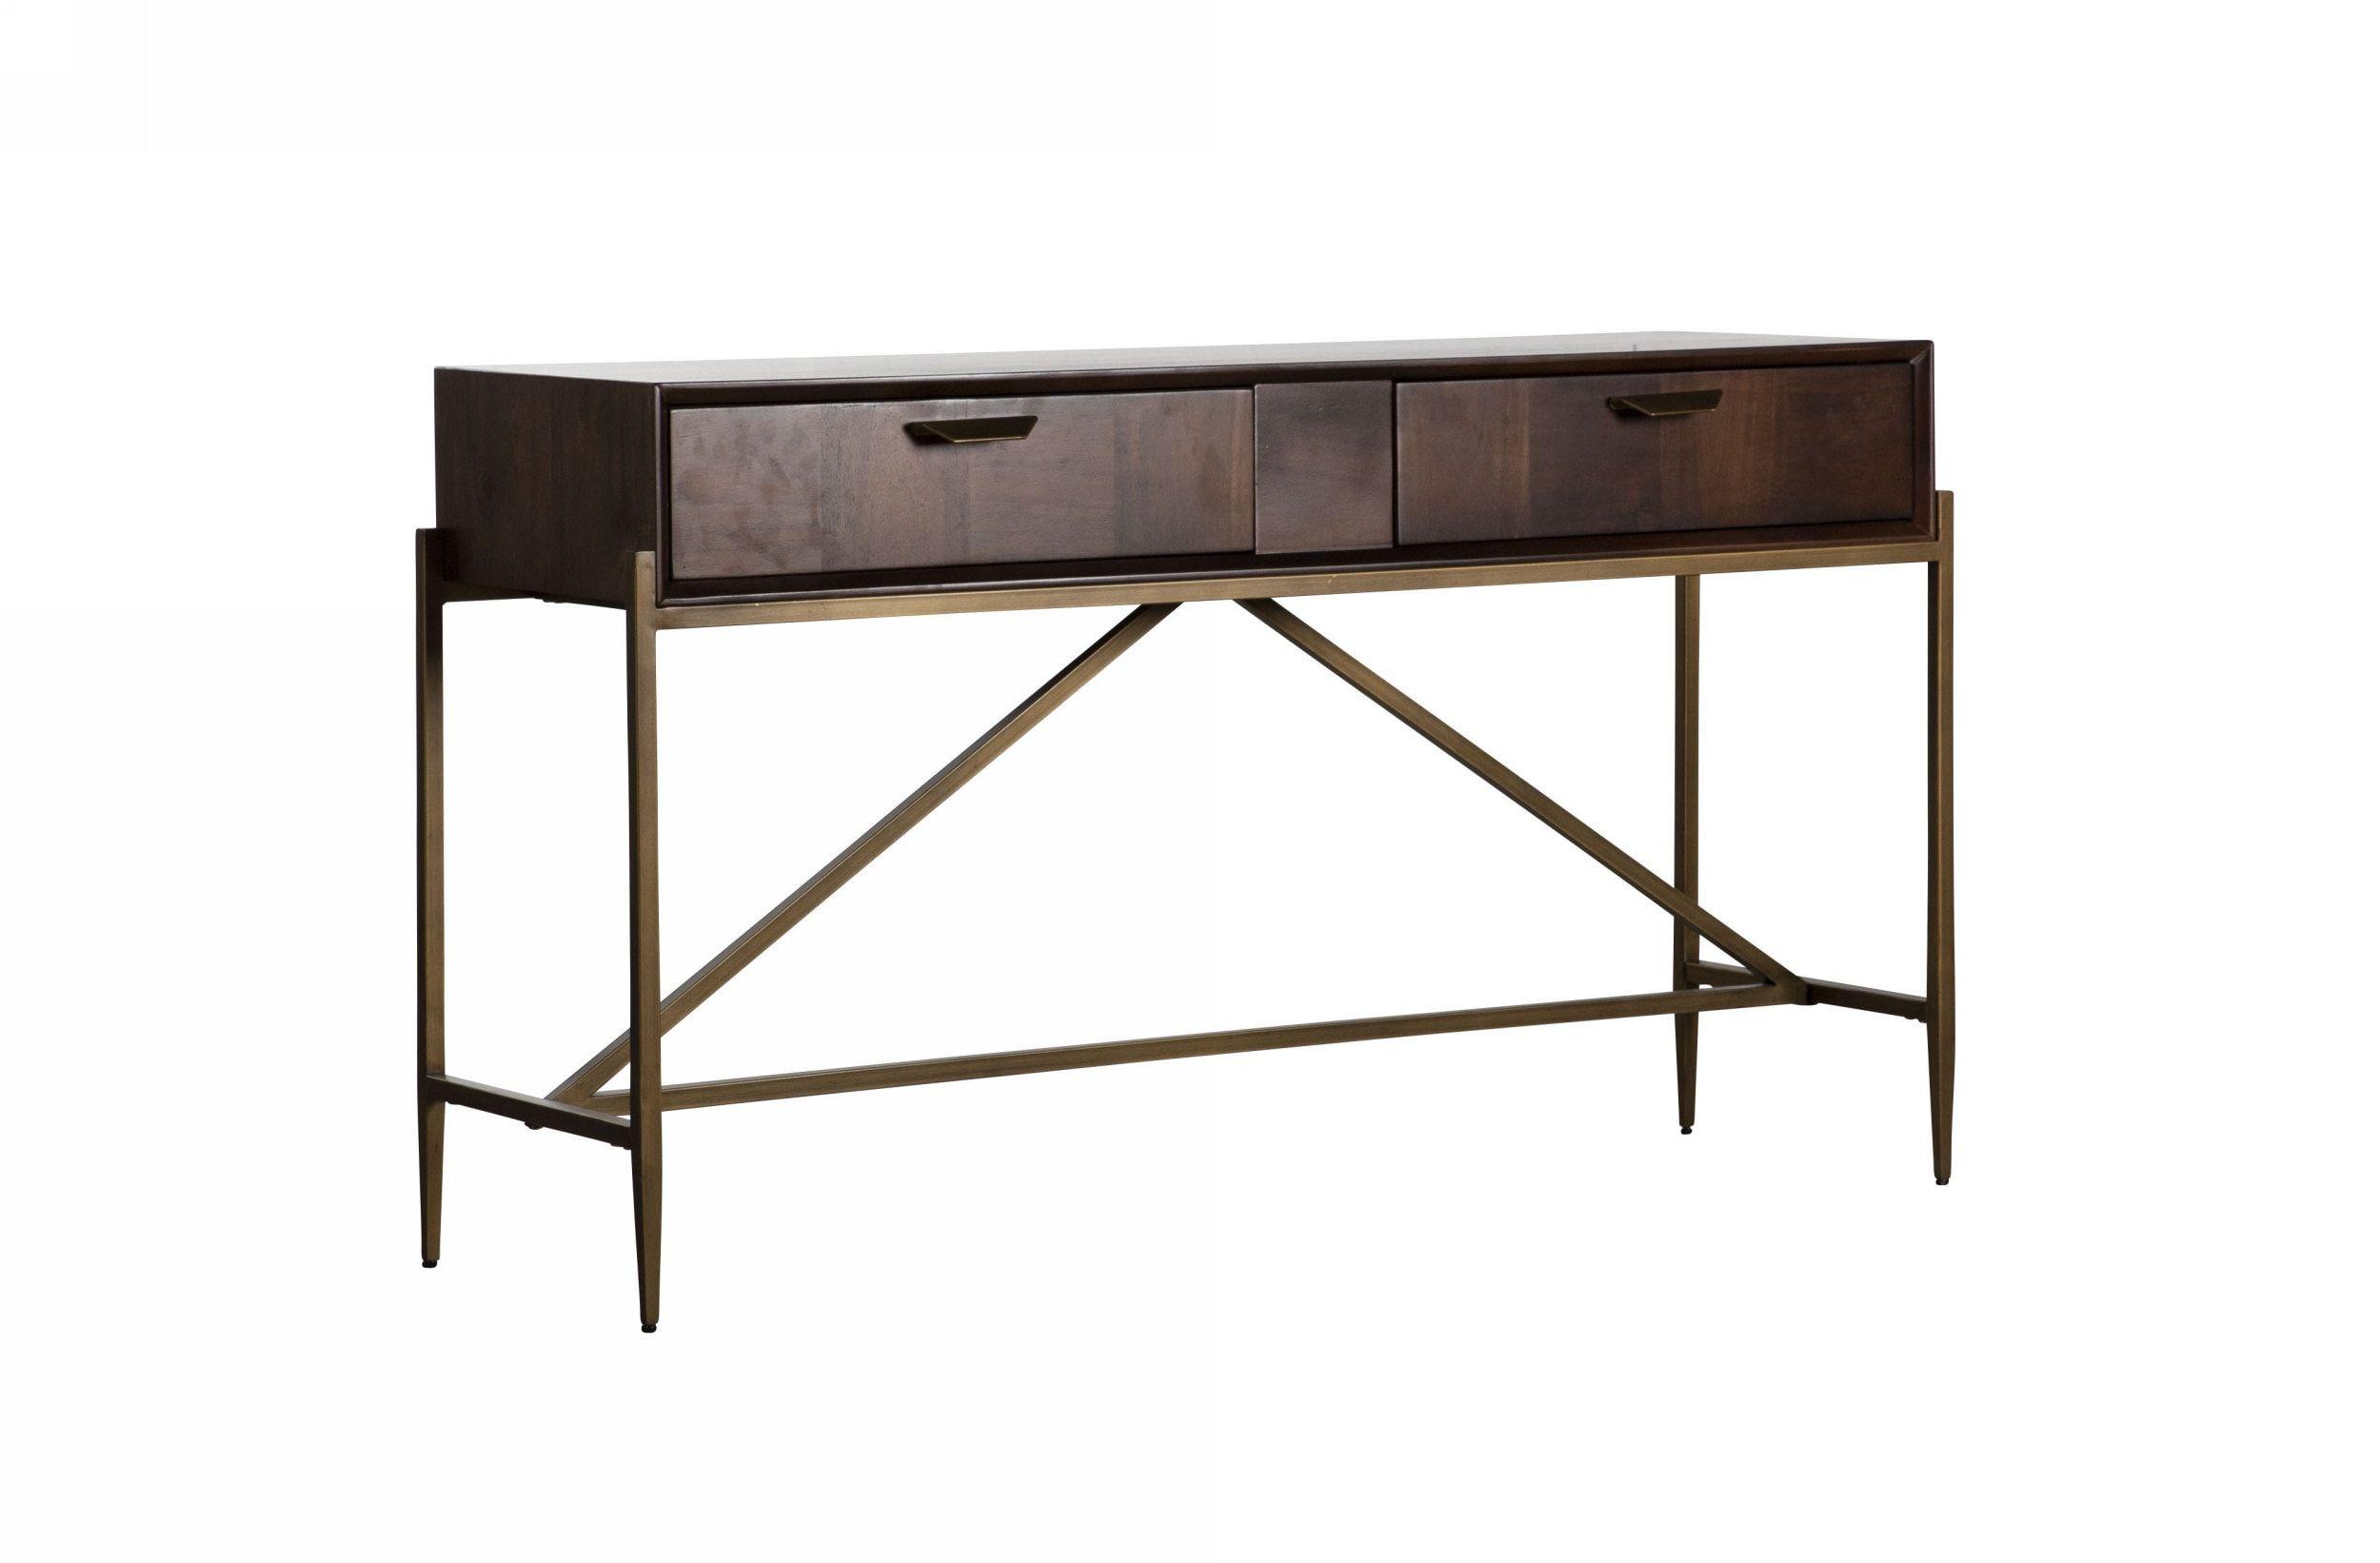 Contemporary, Modern Console Table VGNX-MEMPHIS-20181 VGNX-MEMPHIS-20181 in Dark Brown 